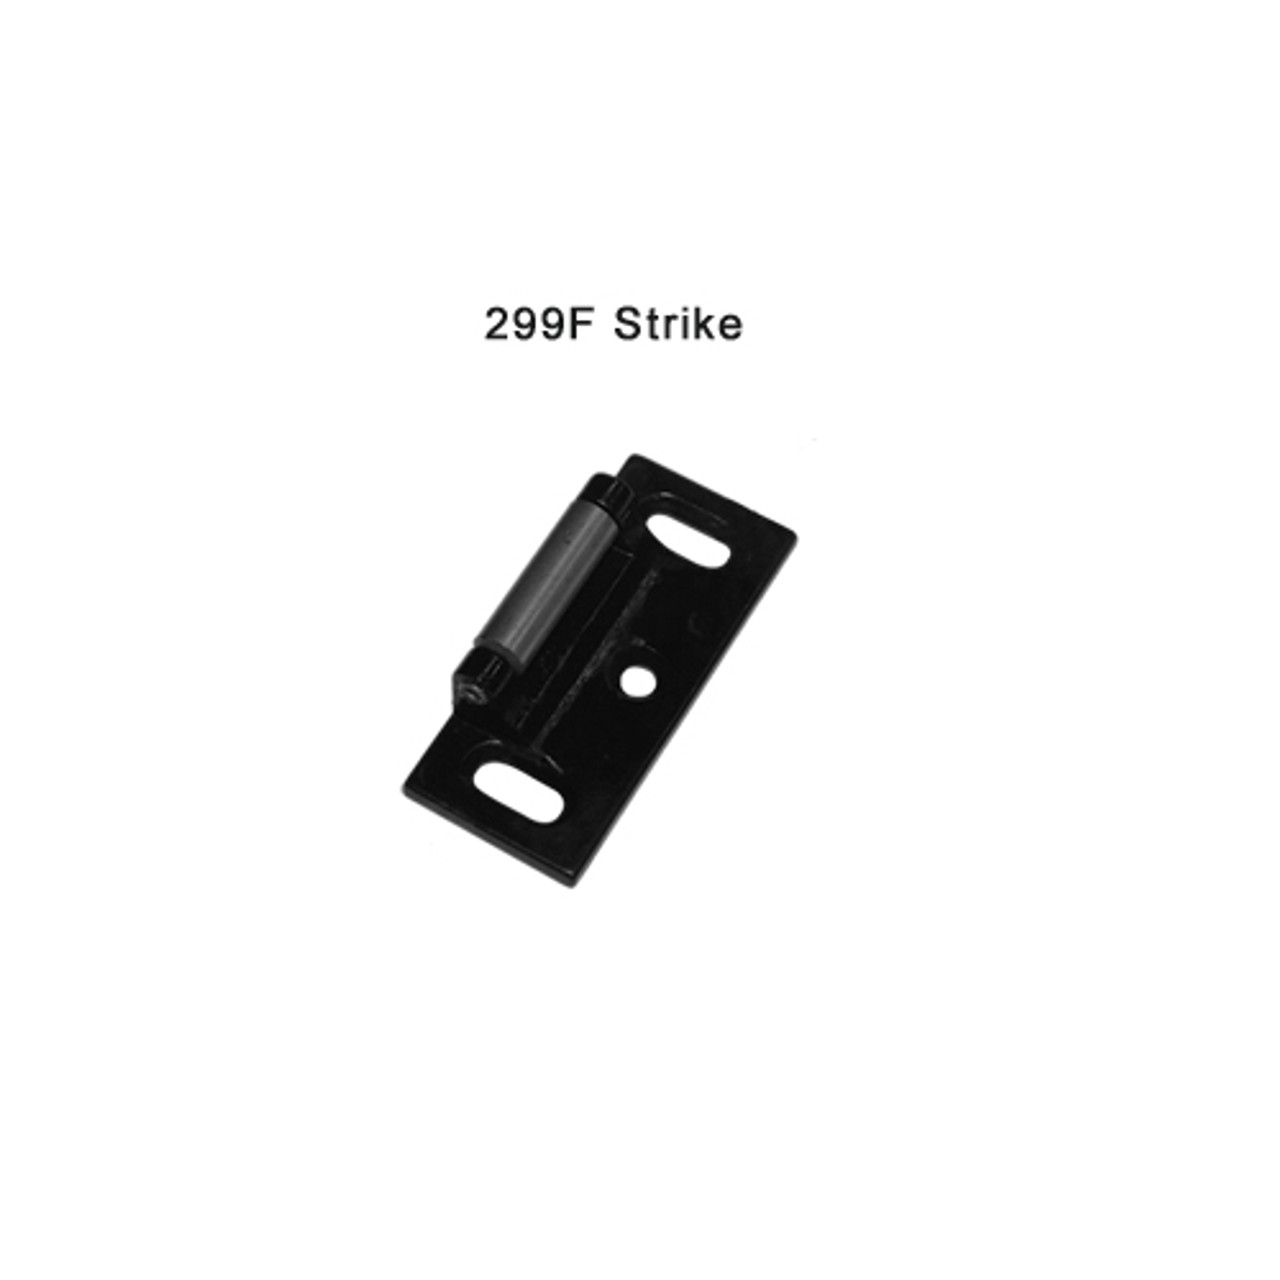 F-25-R-DT-US28-4 Falcon 25 Series Fire Rated Rim Exit Device with 512DT Dummy Trim in Anodized Aluminum